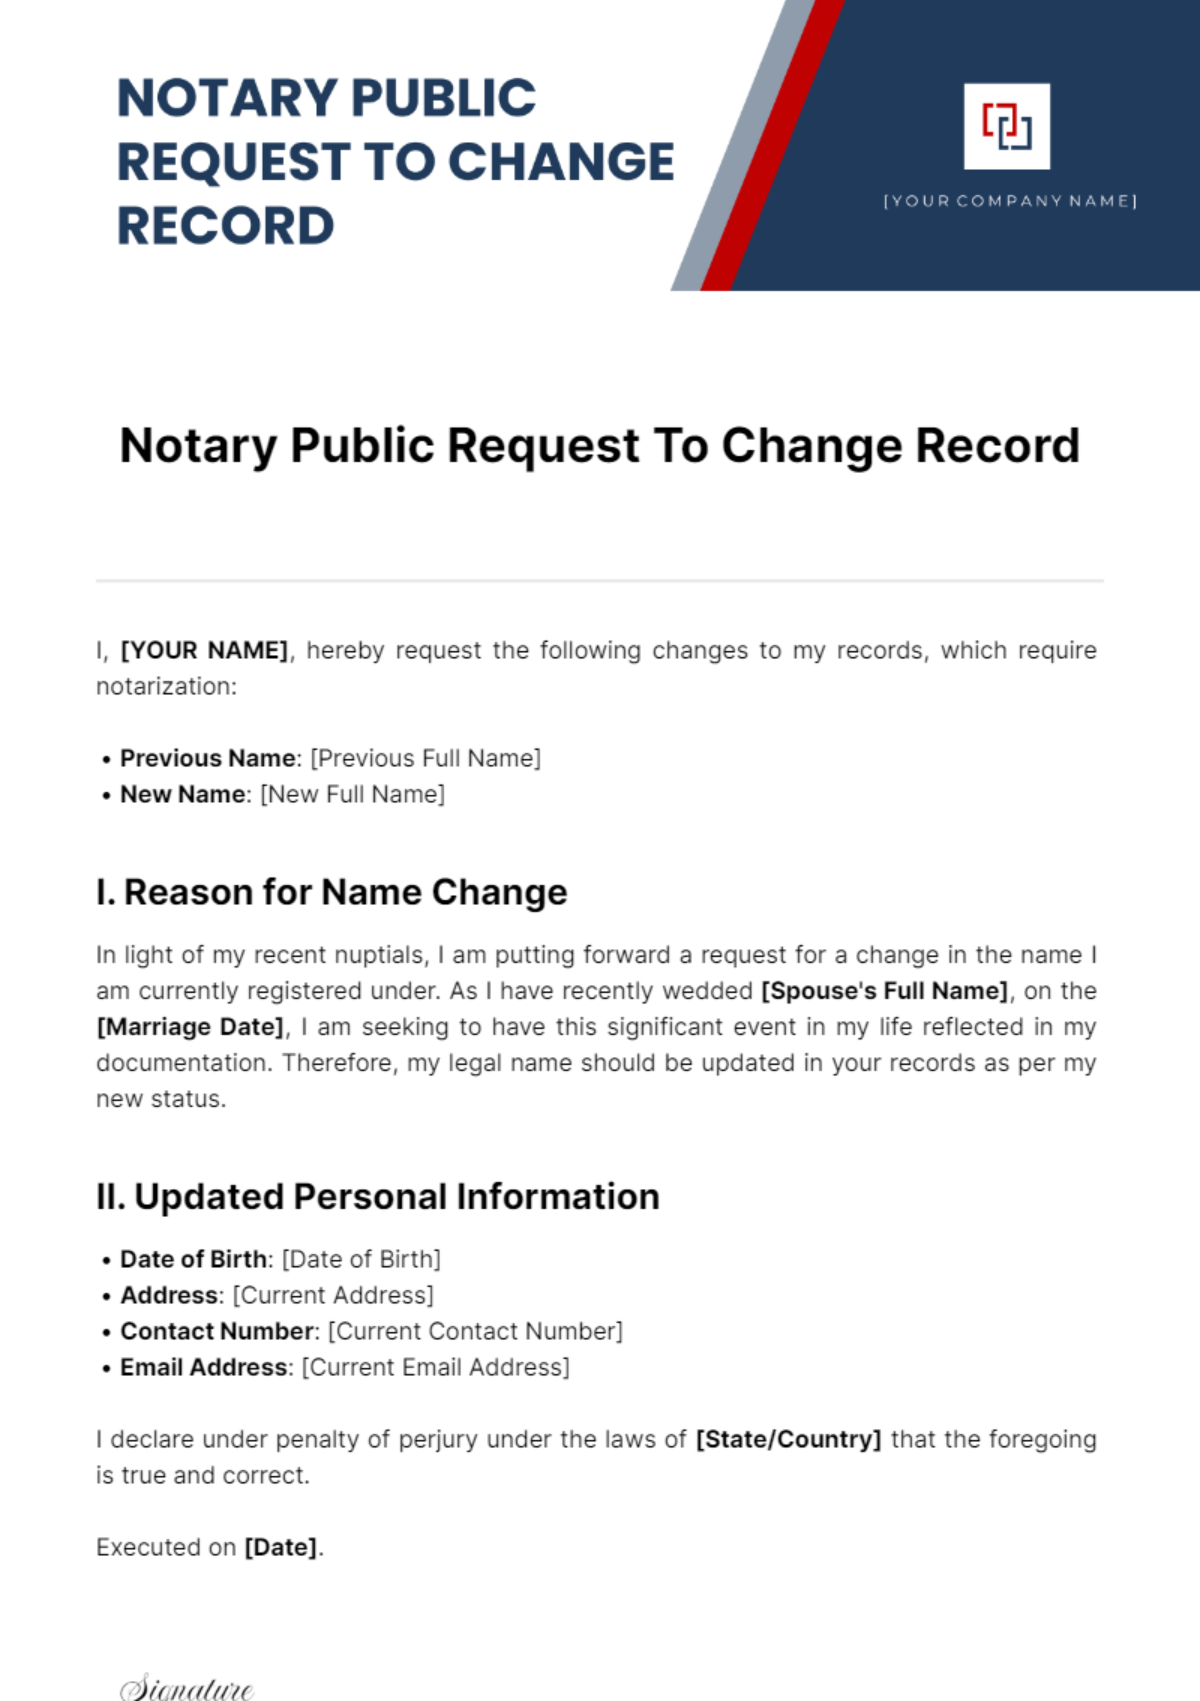 Free Notary Public Request To Change Record Template